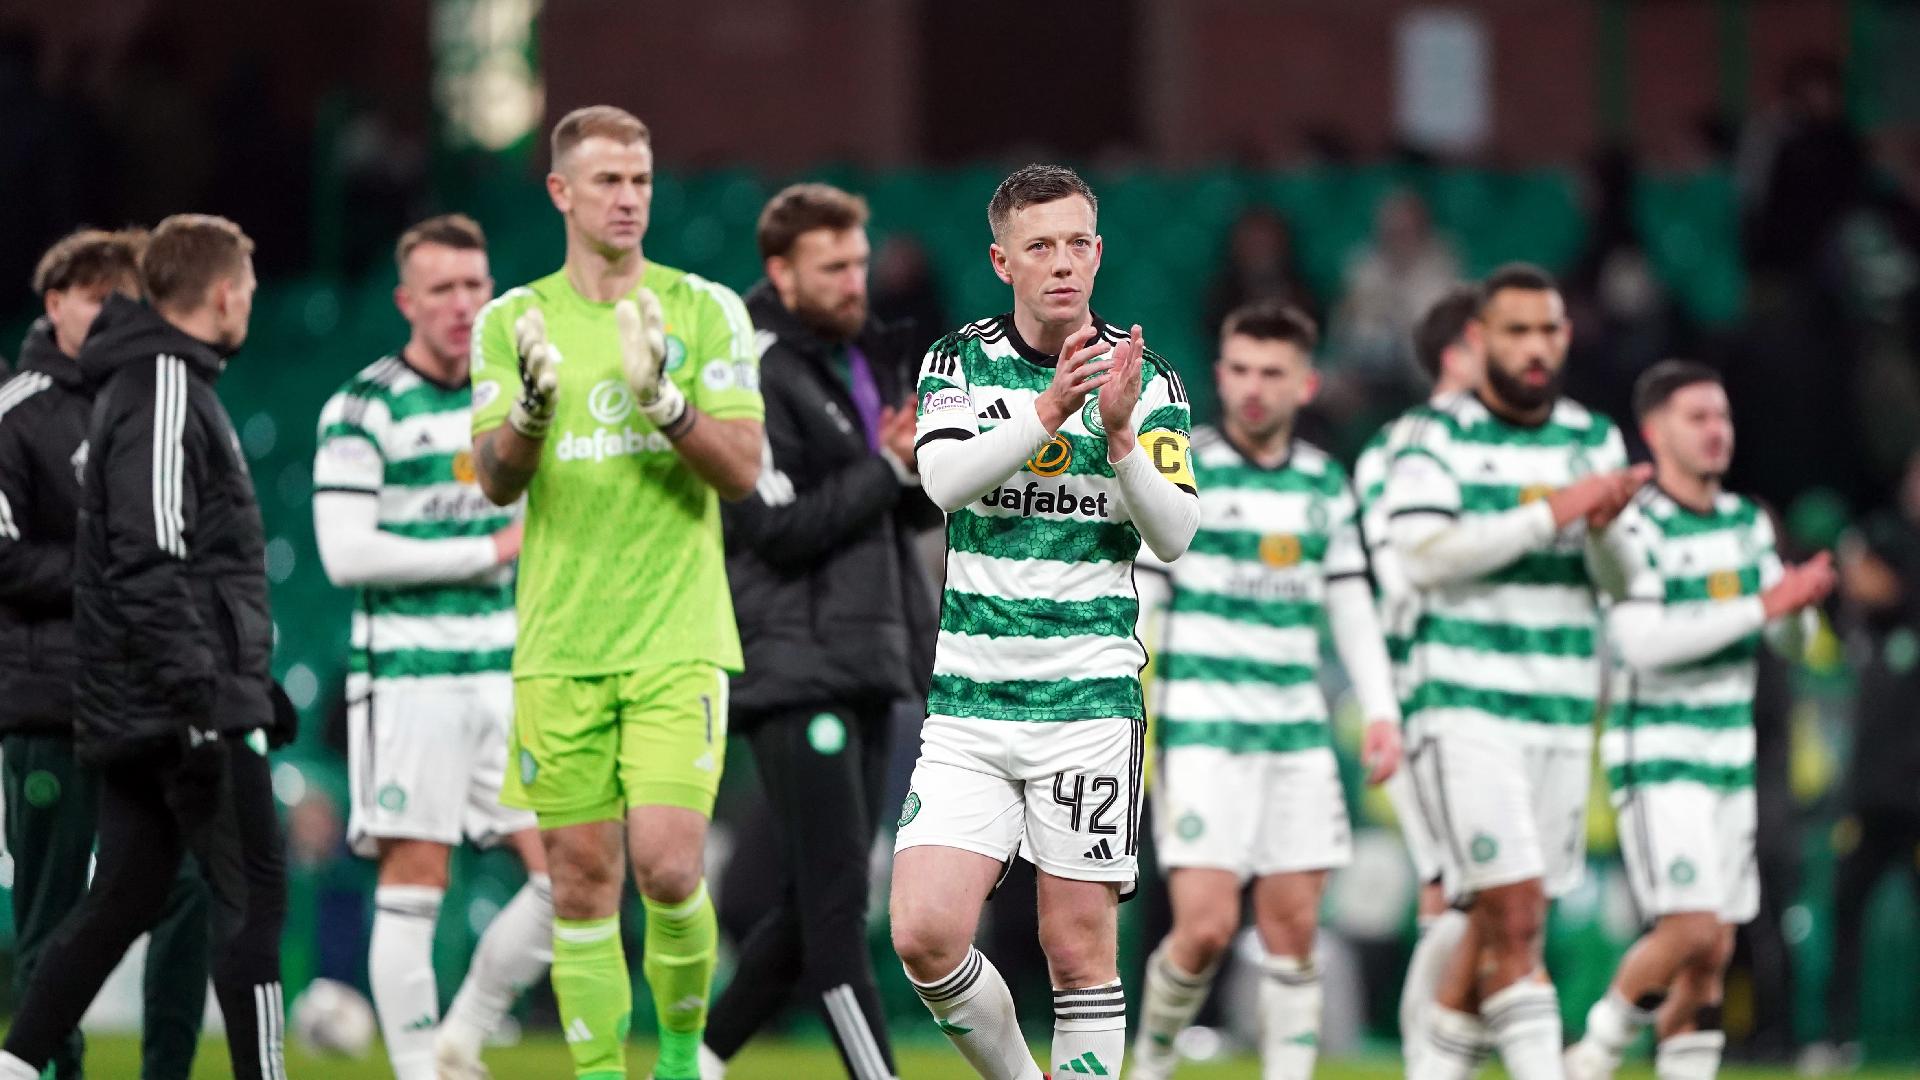 Brendan Rodgers puts responsibility on Celtic team to spark Parkhead atmosphere